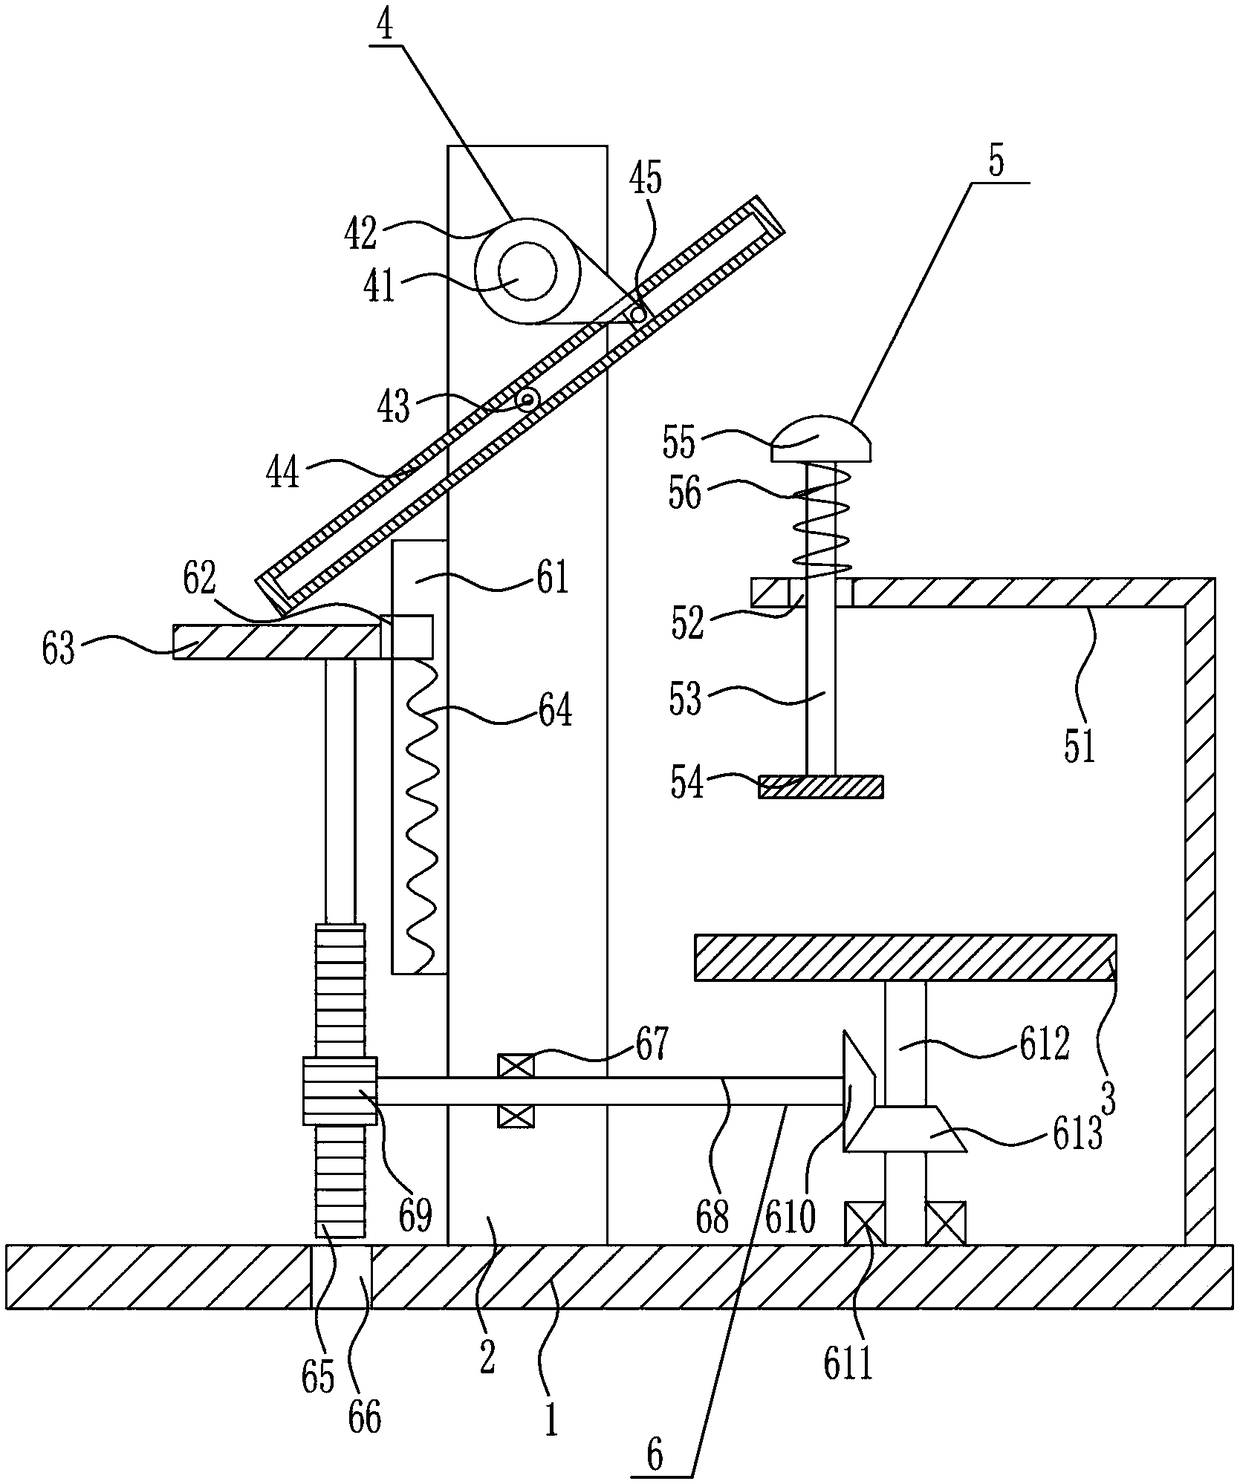 Press-fit auxiliary device used after gluing and used for electronic product production